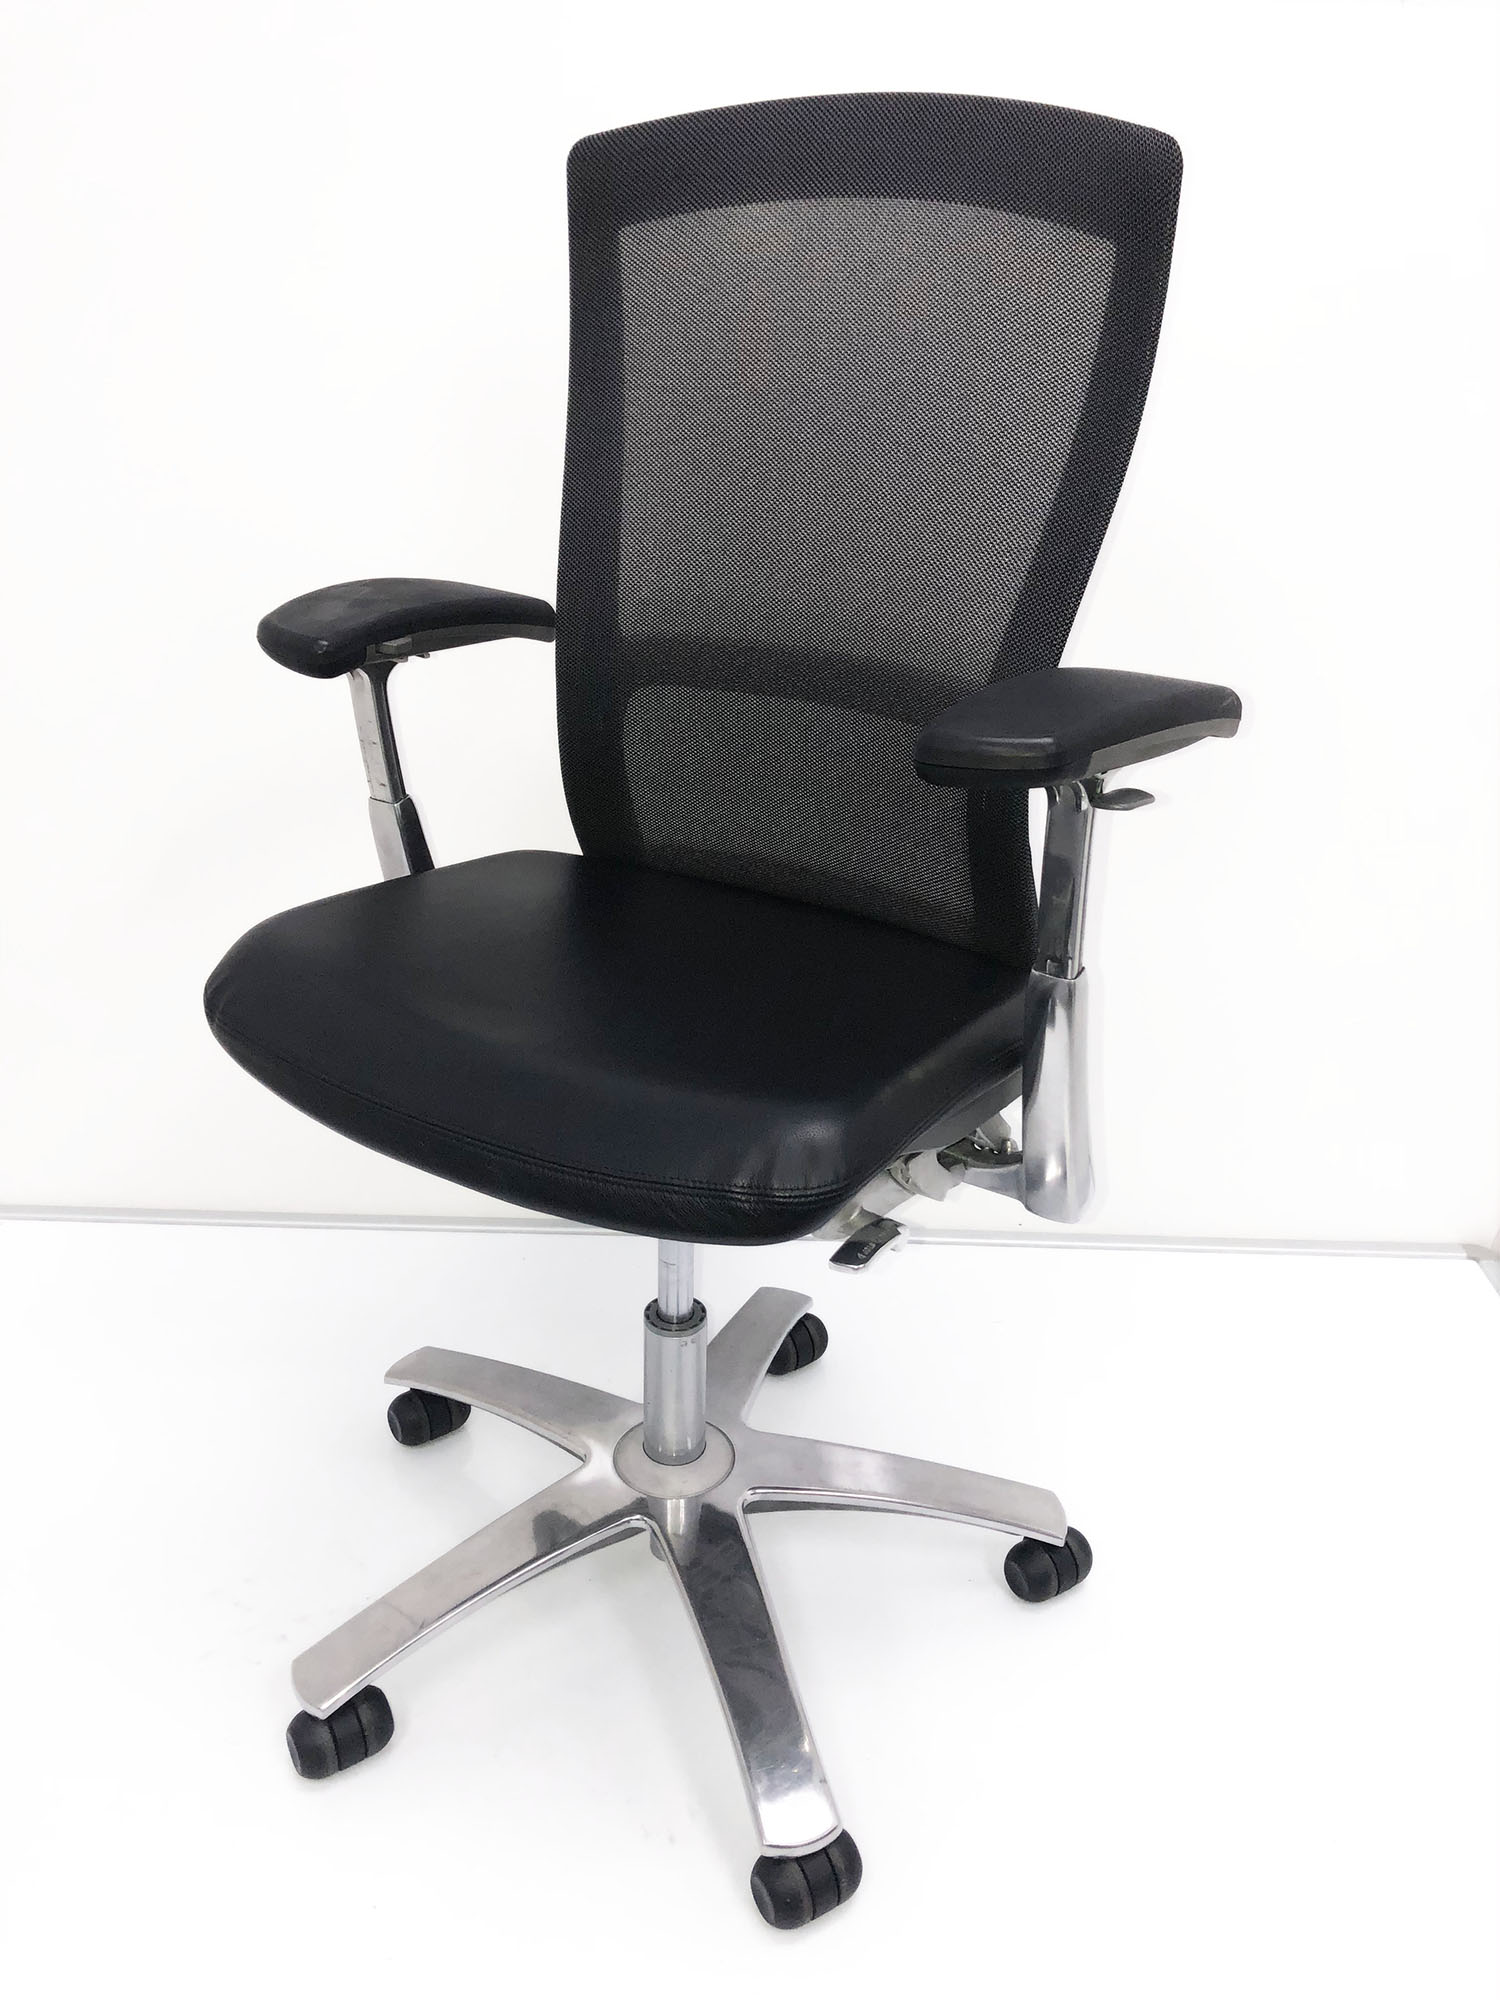 *USED* KNOLL LIFE ERGONOMIC OFFICE CHAIR $175 or Best Offer 